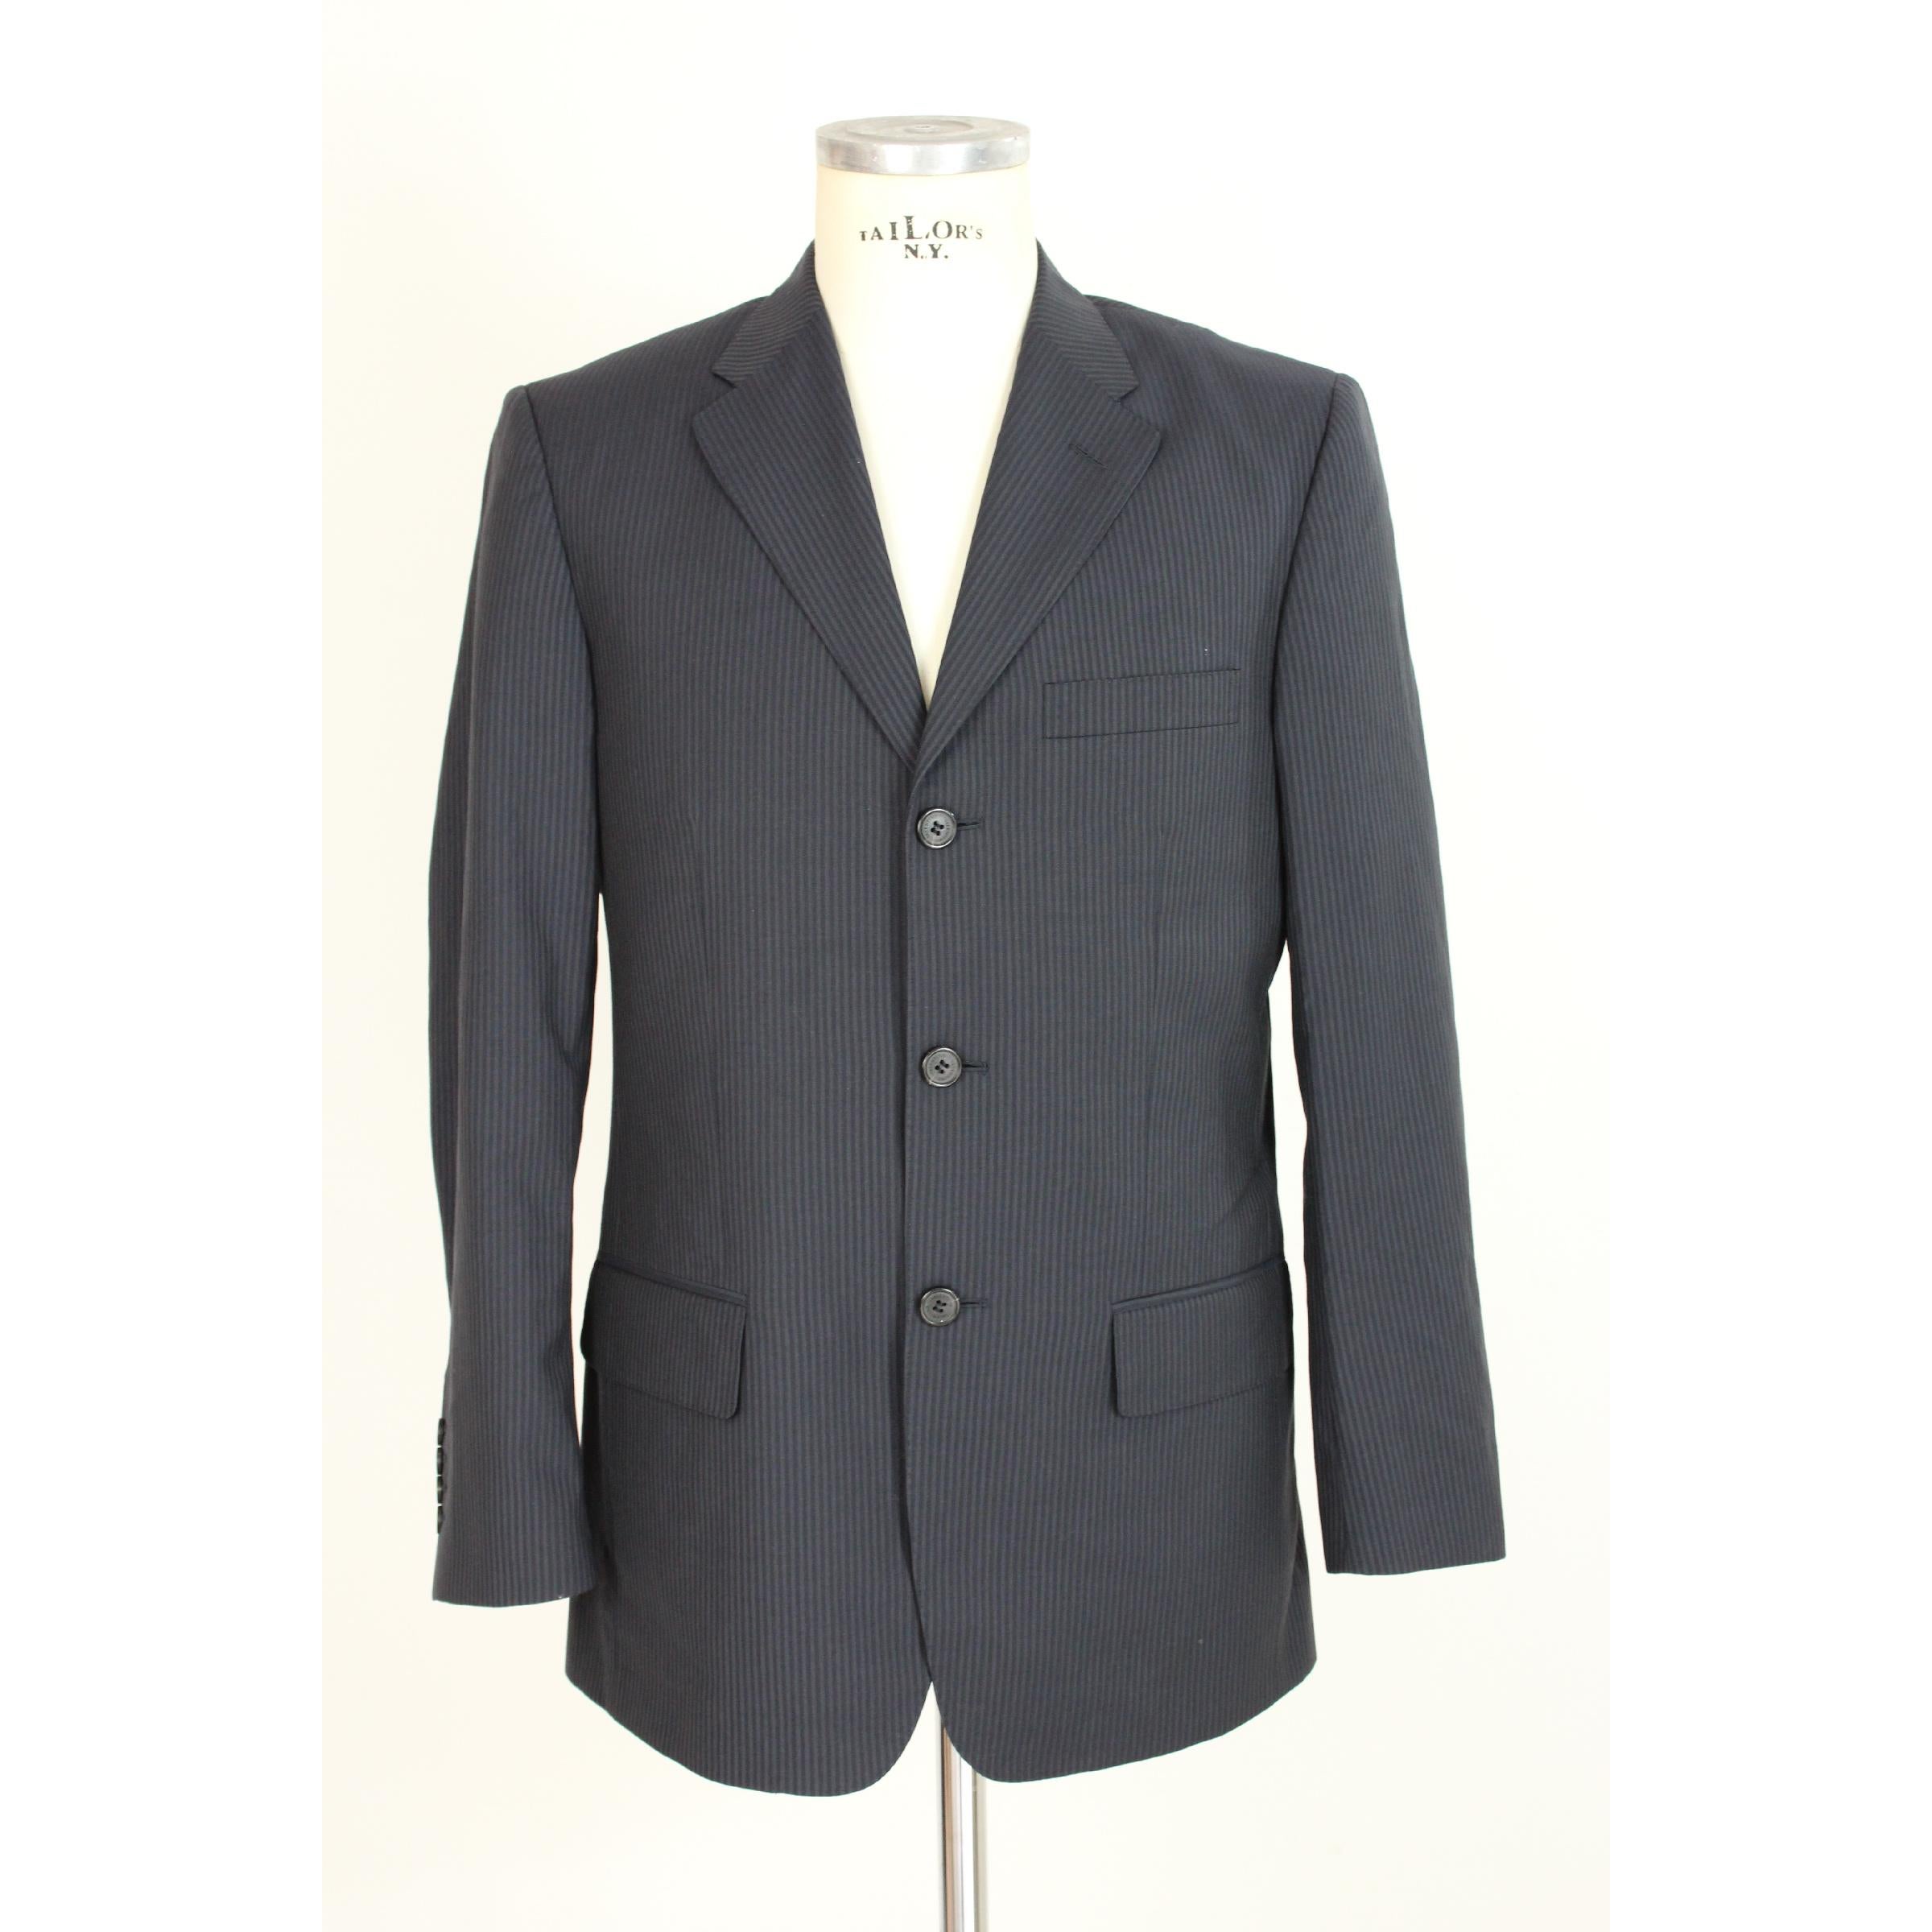 Valentino Roma three-button vintage pinstripe jacket, blue and gray, 100% wool. Classic model. Made in Italy. Excellent vintage conditions.

Size: 48 It 38 Us 38 Uk

Shoulder: 48 cm
Bust / chest: 54 cm
Sleeve: 62 cm
Length: 80 cm